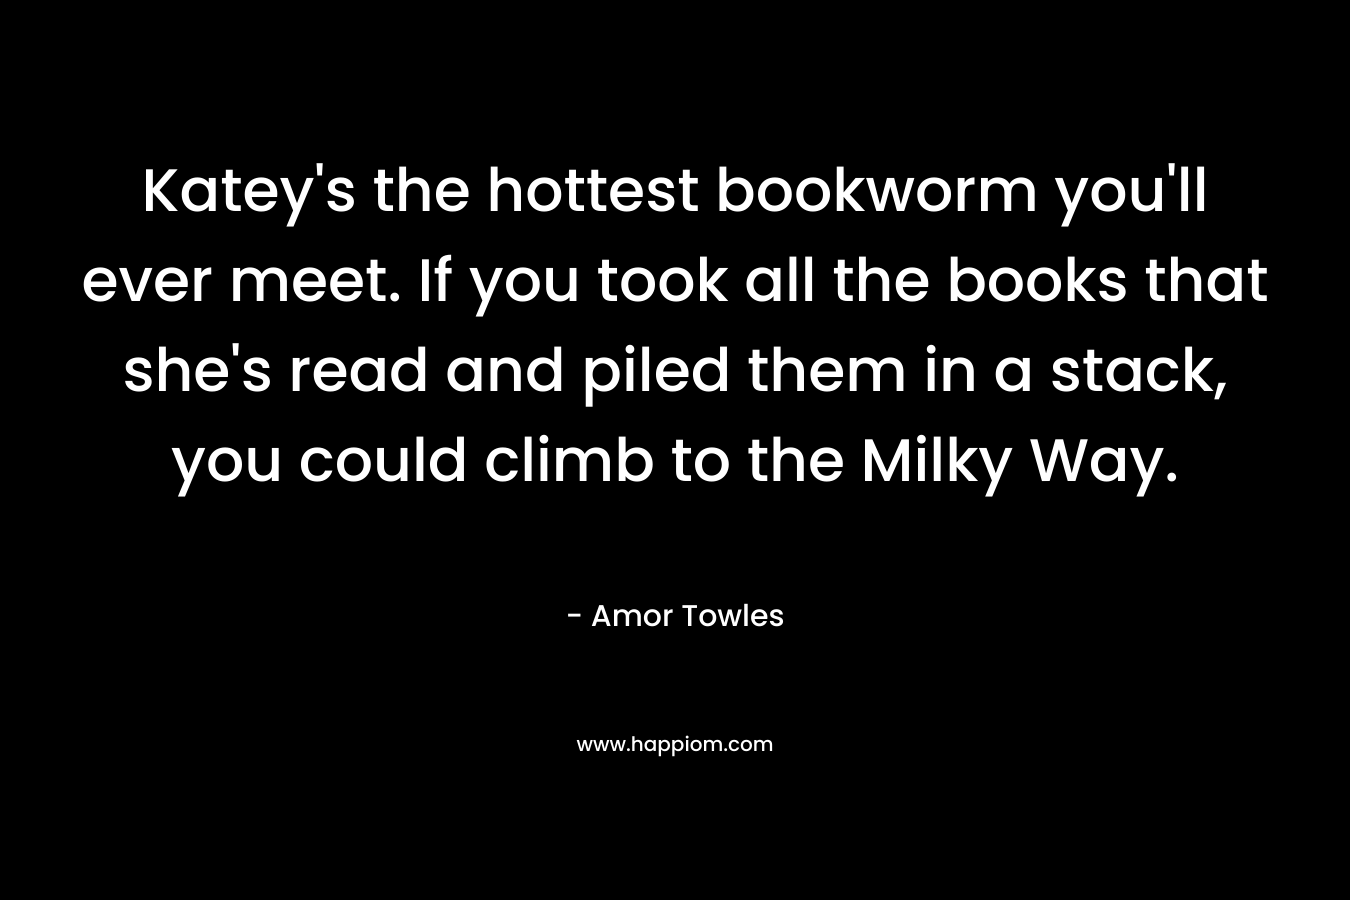 Katey’s the hottest bookworm you’ll ever meet. If you took all the books that she’s read and piled them in a stack, you could climb to the Milky Way. – Amor Towles